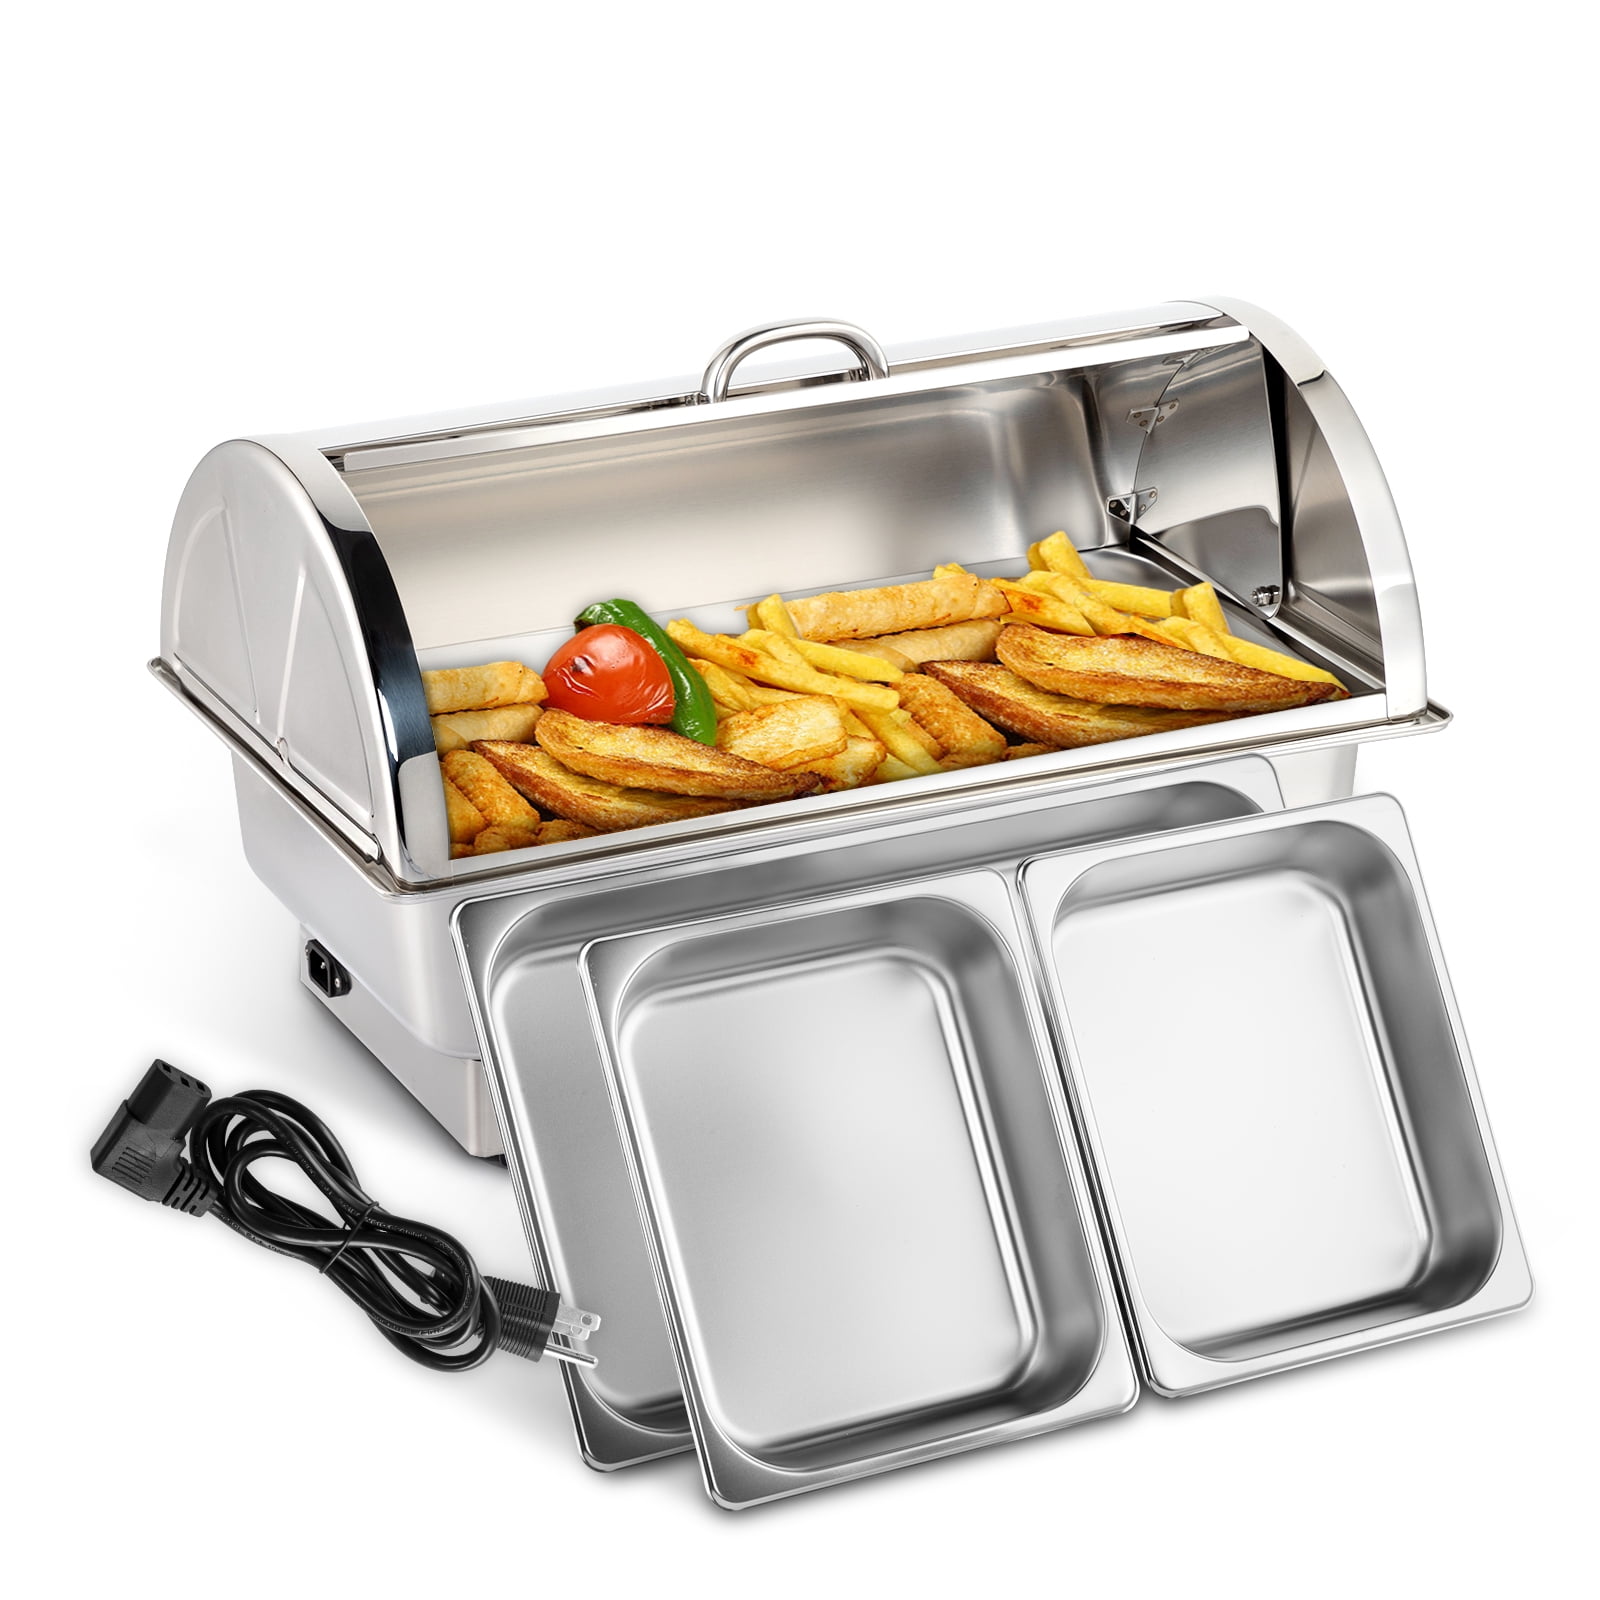 KFJZGZZ Food Warmers for Parties, Electric Chafing Dish Buffet Set